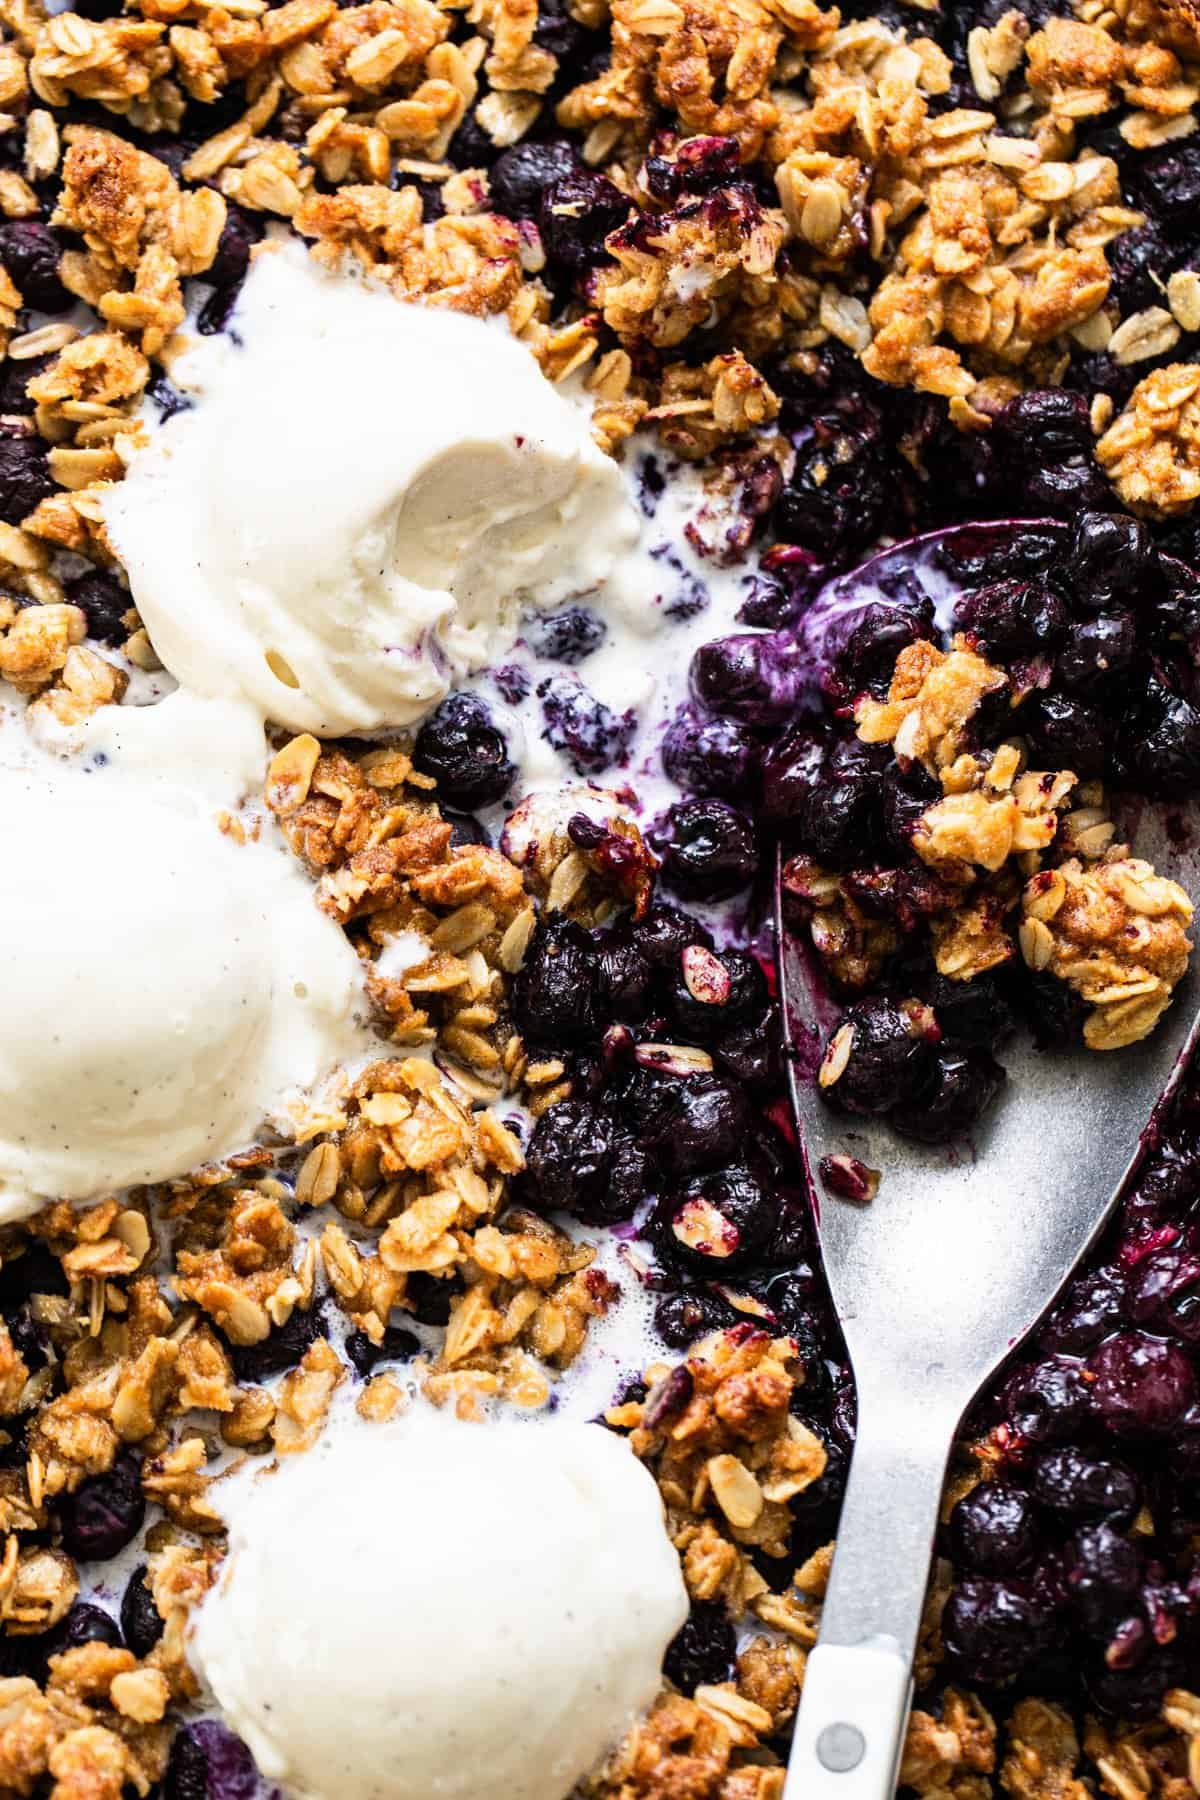 Baked blueberry crumble with scoops of vanilla ice cream.